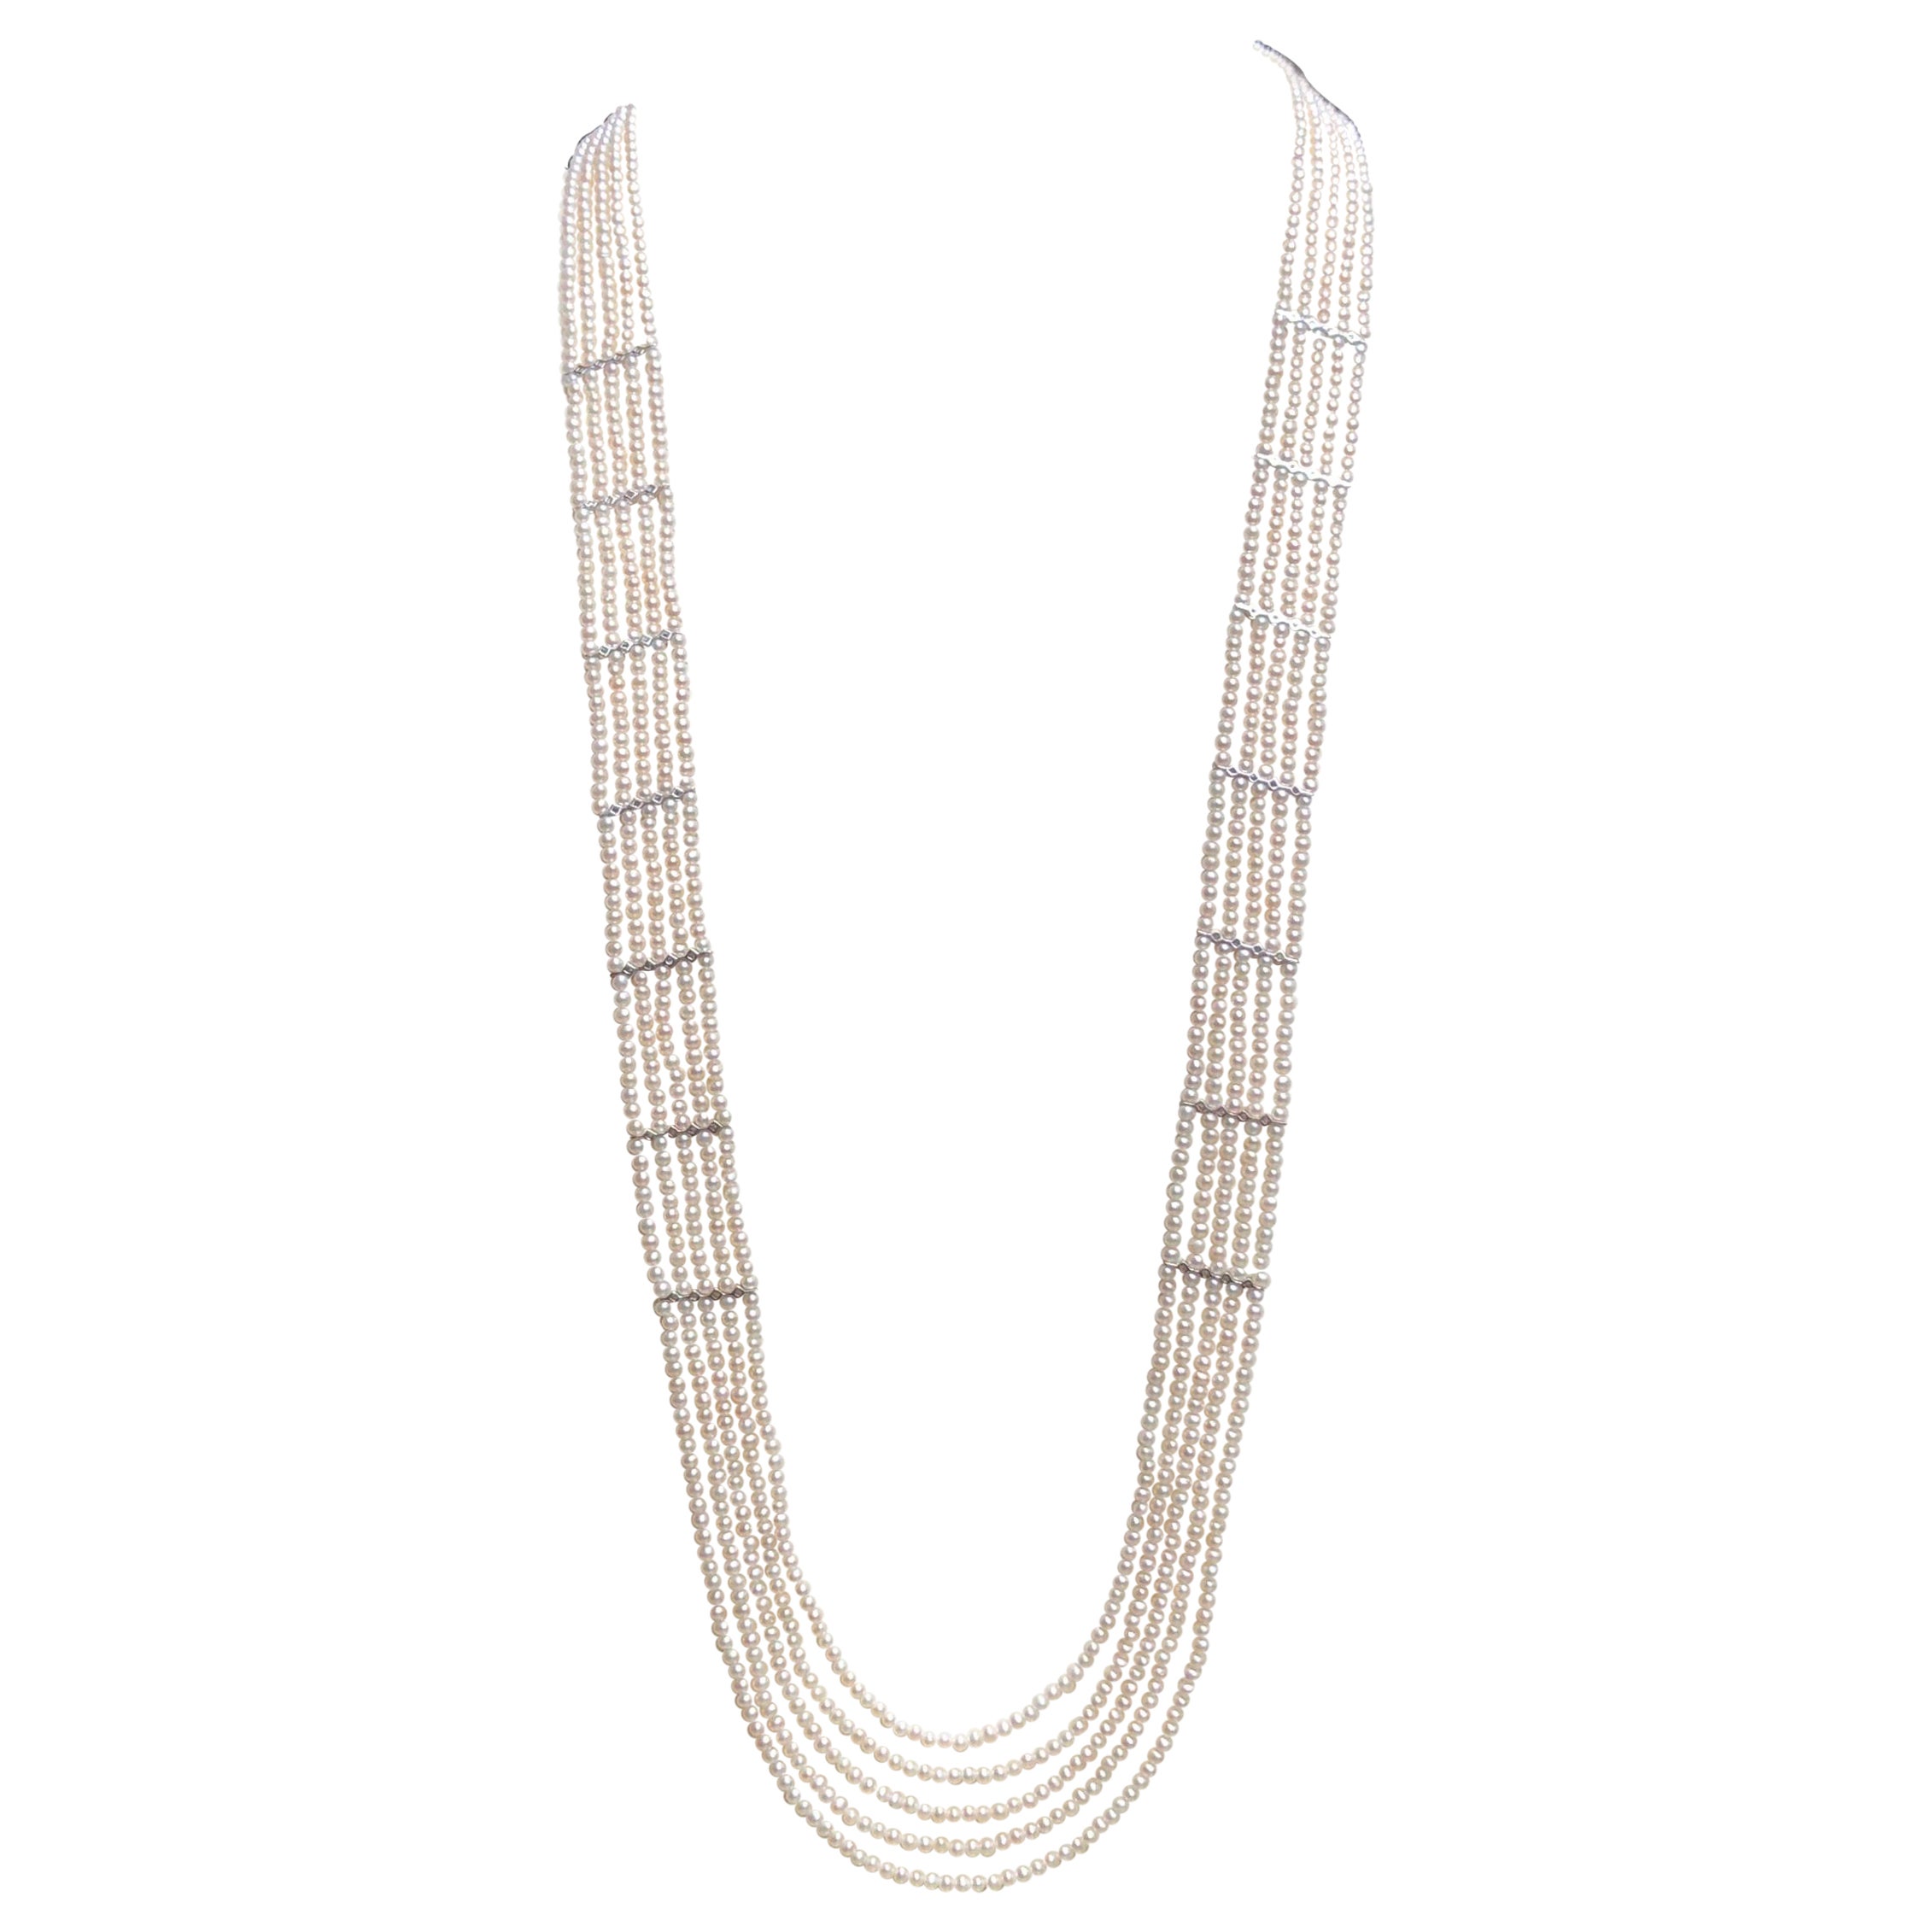 Fresh Water Pearl with Diamond Necklace Set in 18 Karat White Gold